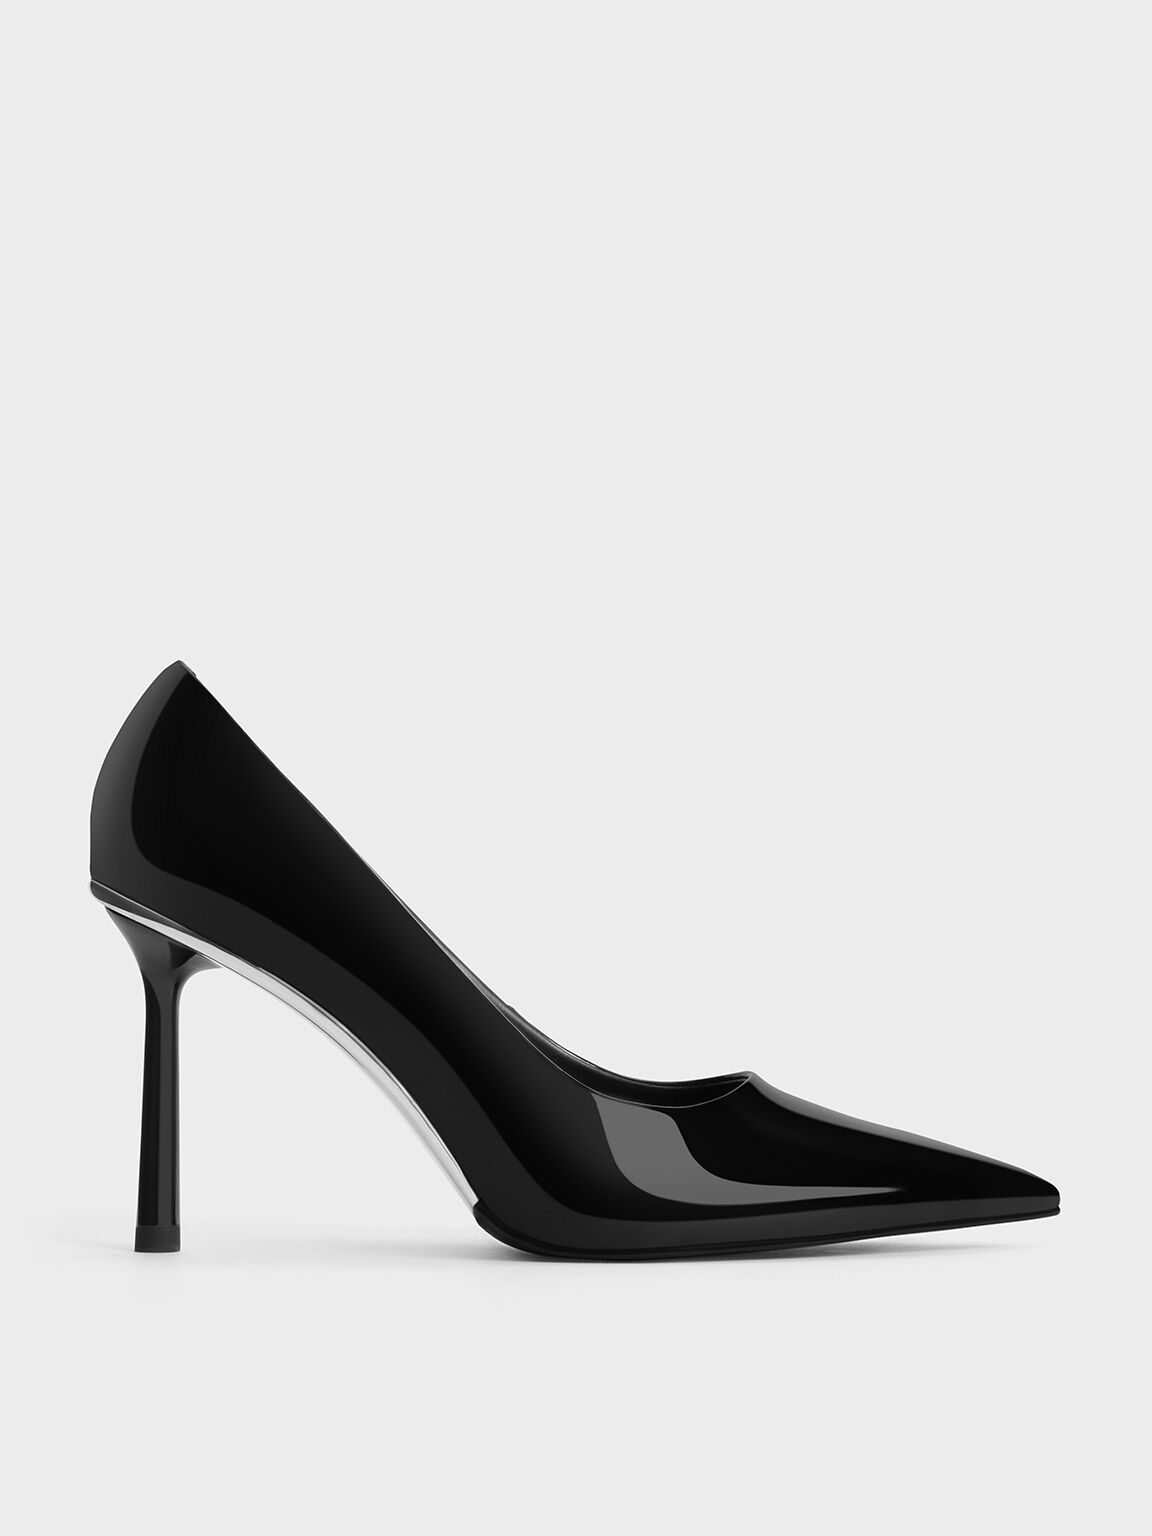 Amazon.com: Pointed Black Heels With Straps